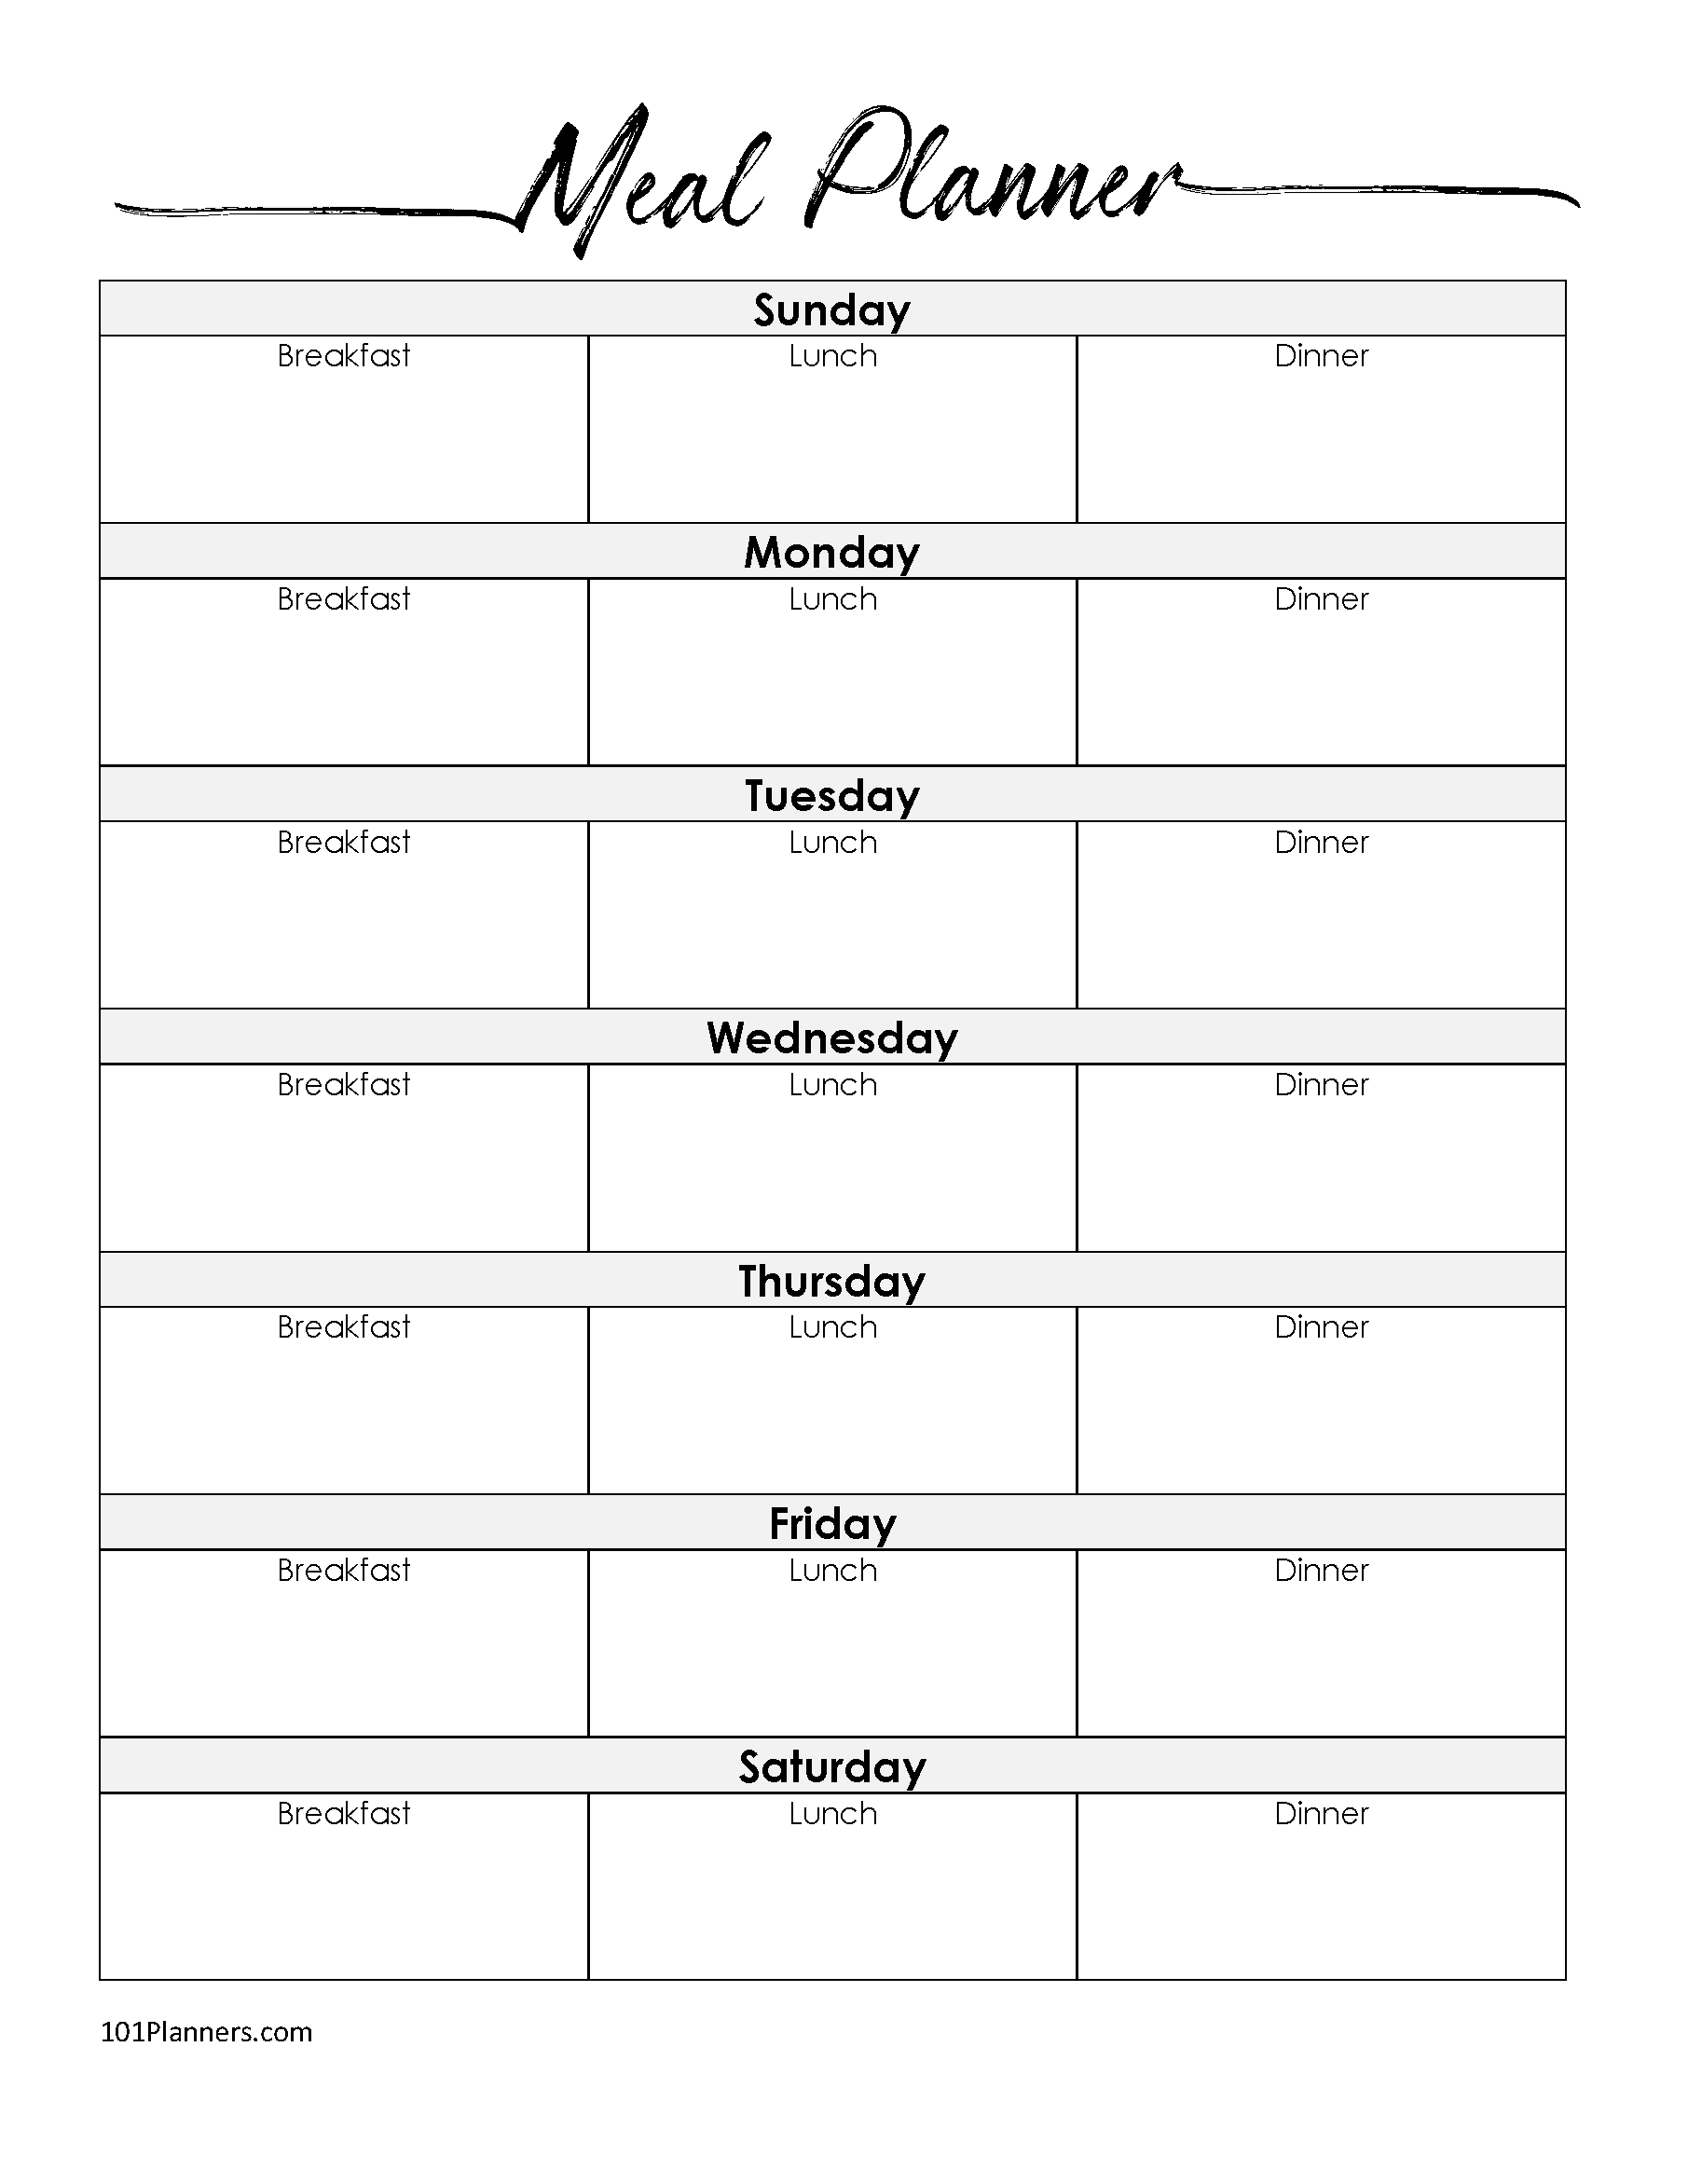 https://www.101planners.com/wp-content/uploads/2020/05/Meal-planner-4-from-sunday.png